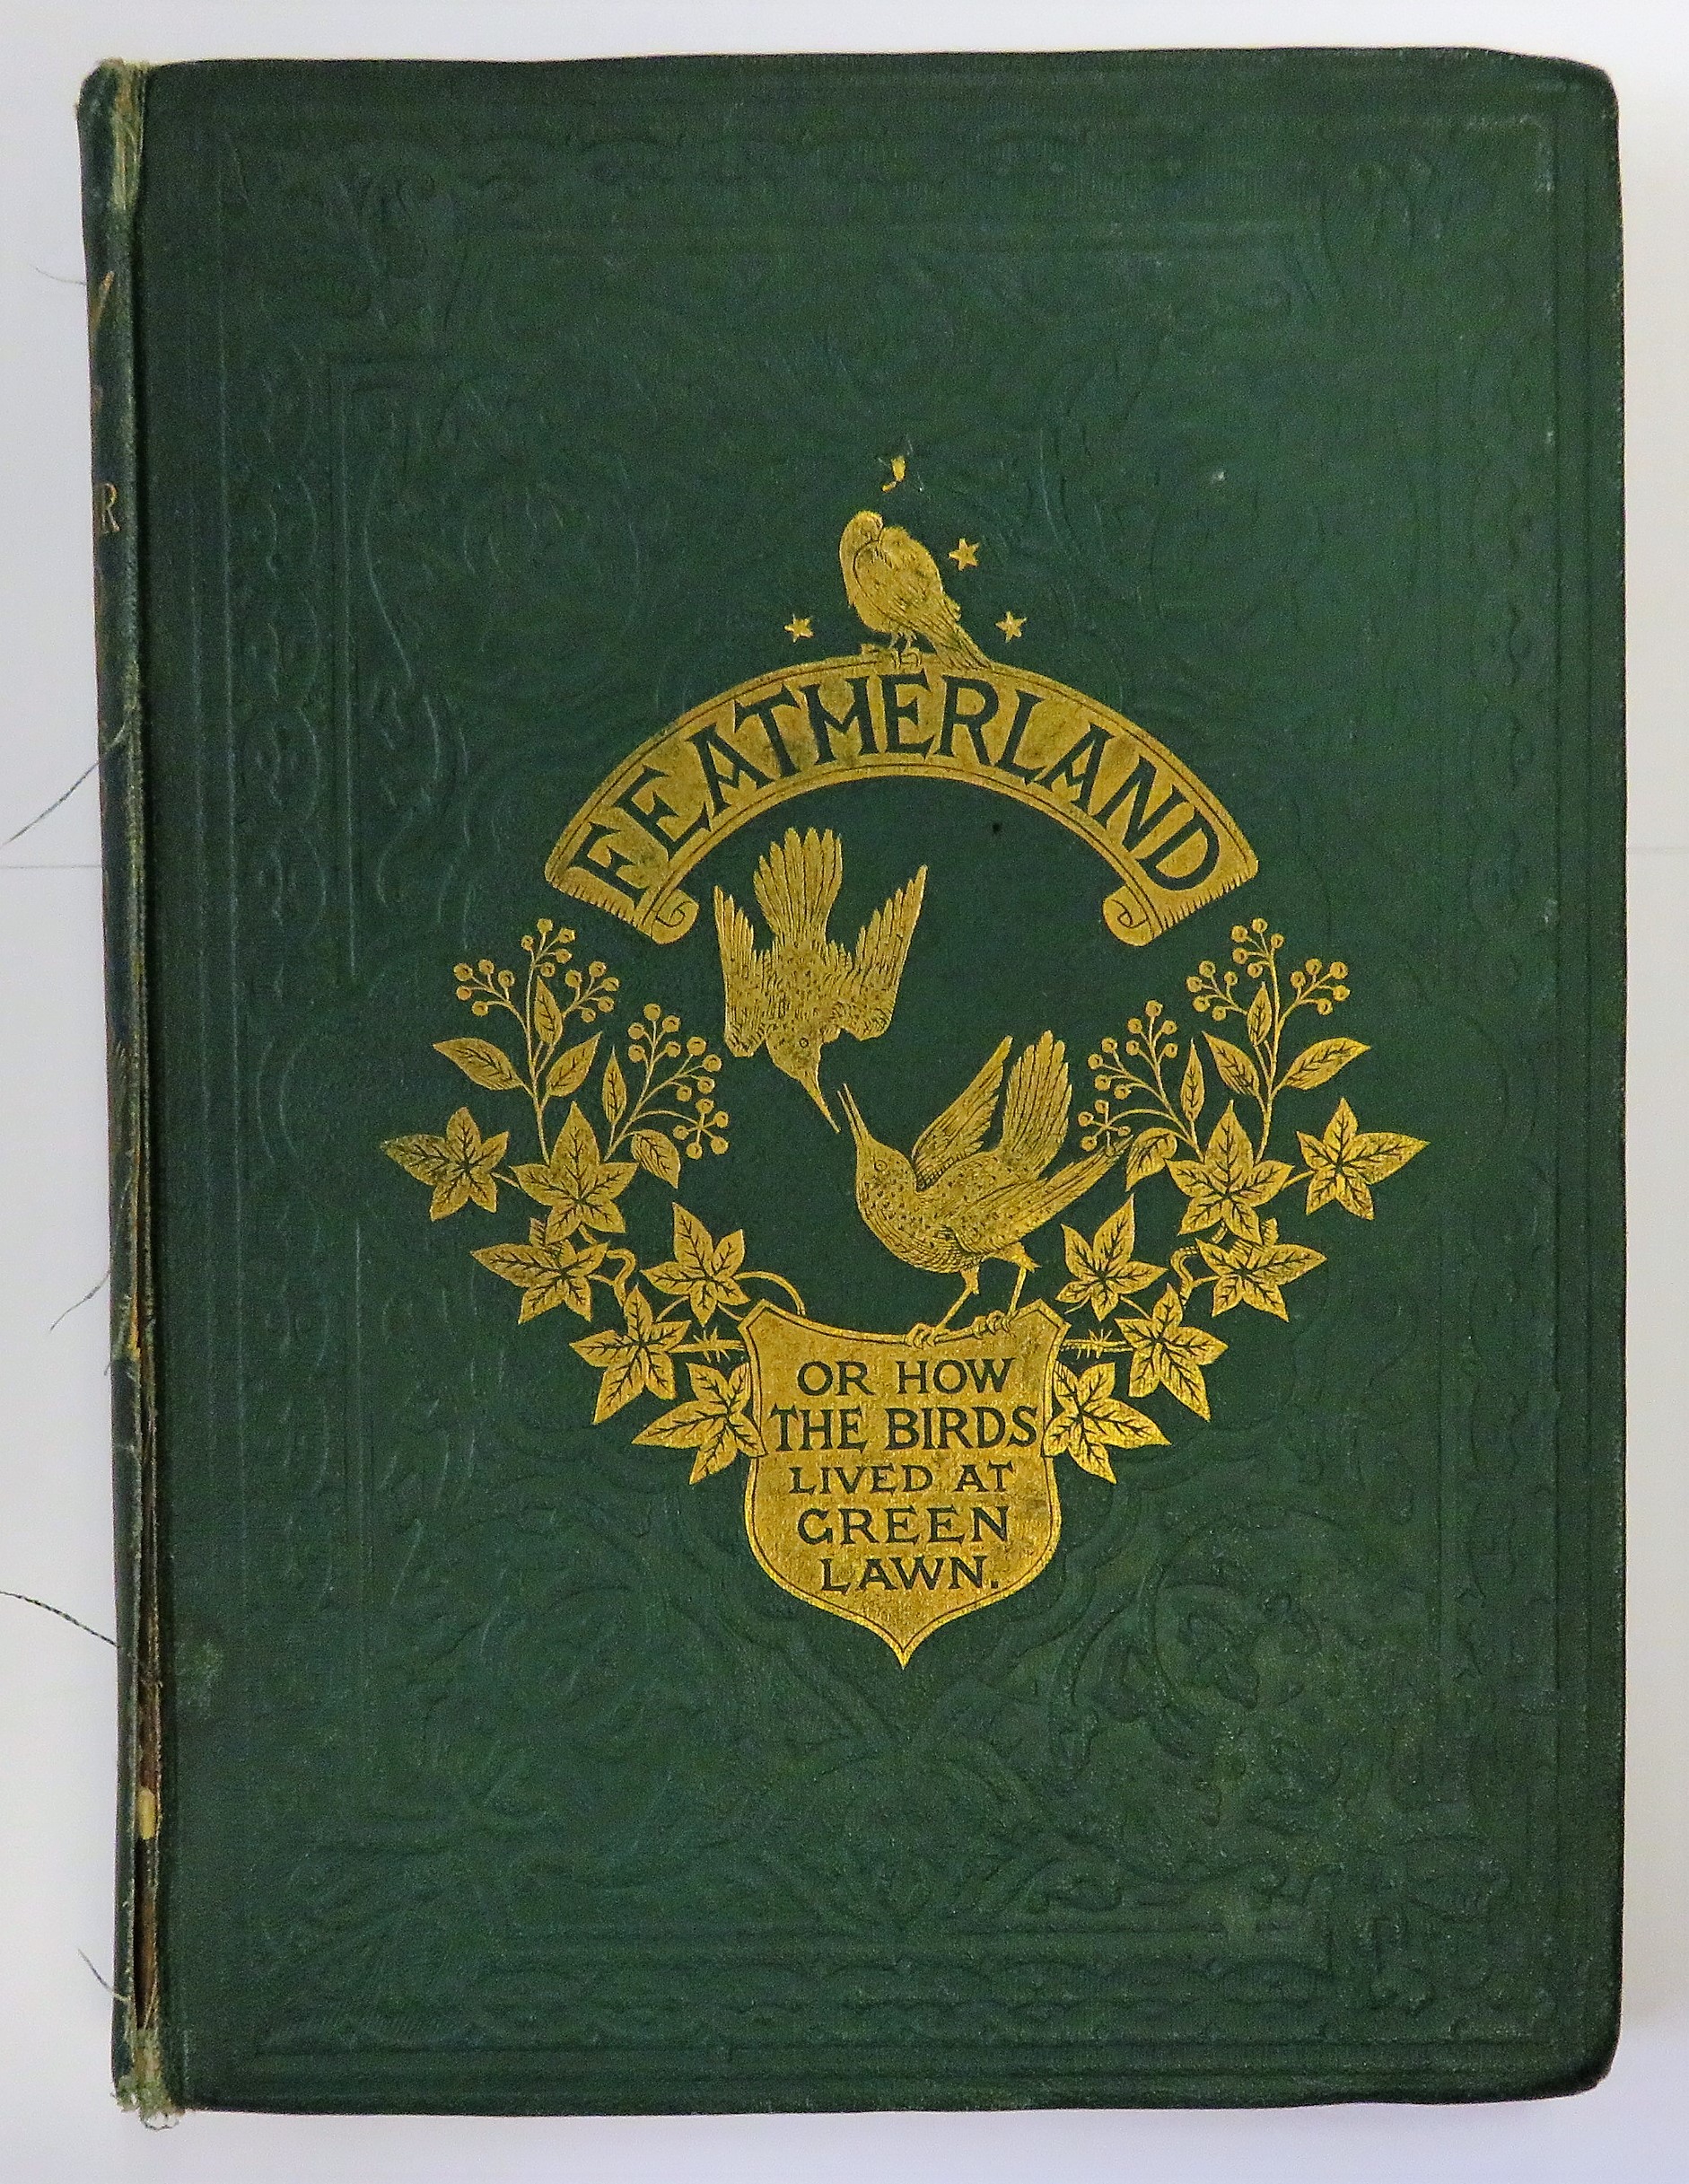 Featherland Or How The Birds Lived At Greenlawn 